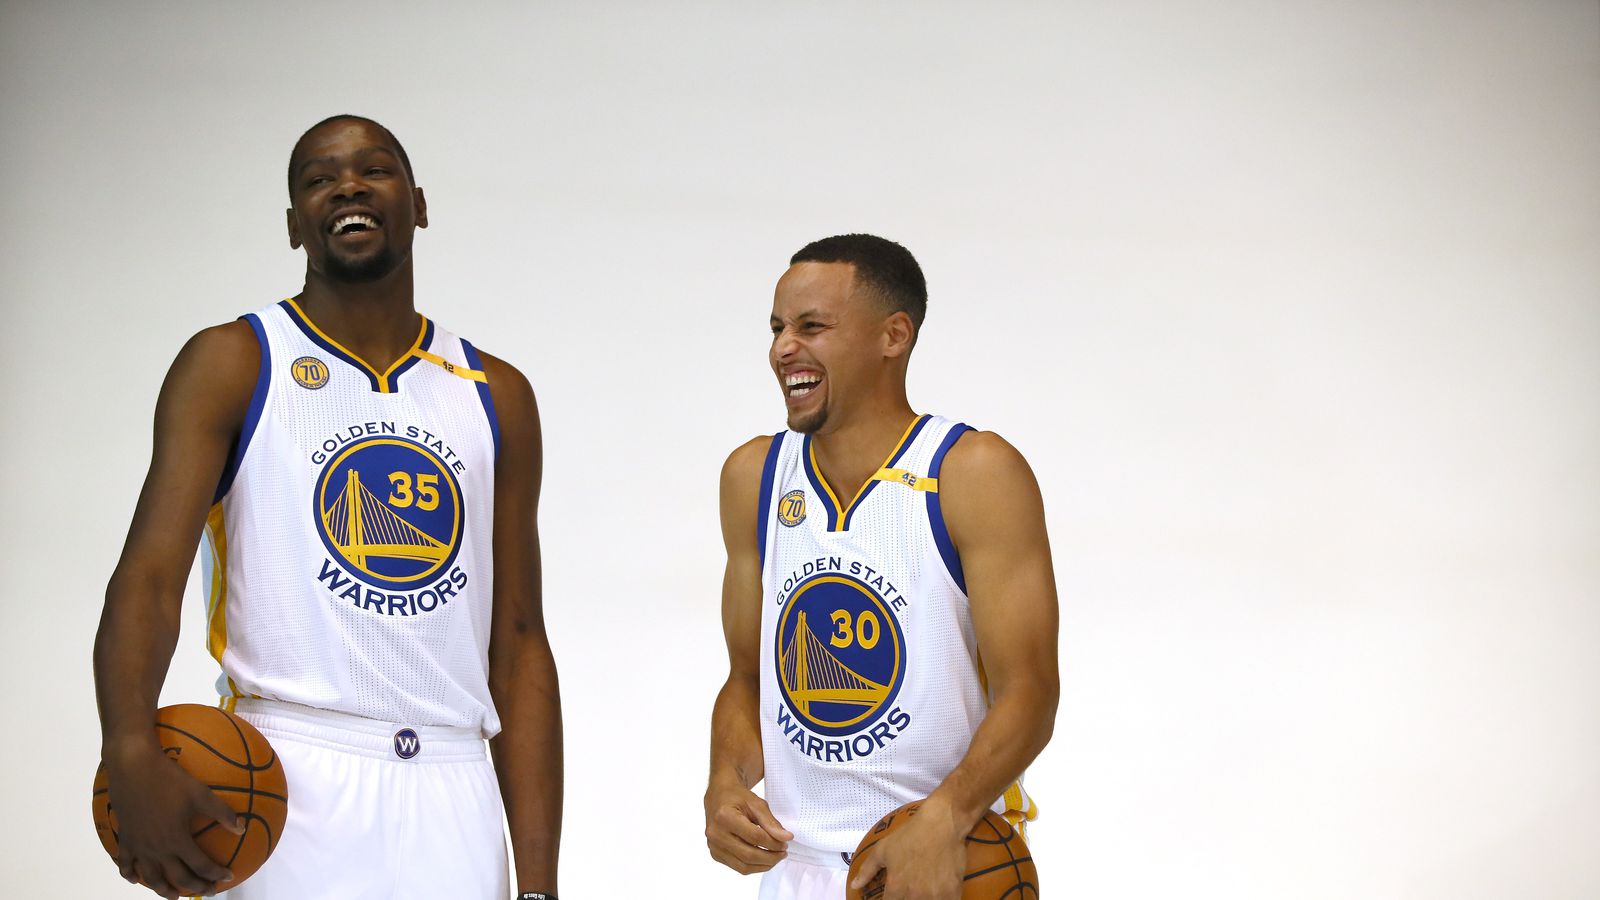 stephen curry and kevin durant wallpaper,basketball player,basketball,sportswear,sports uniform,player